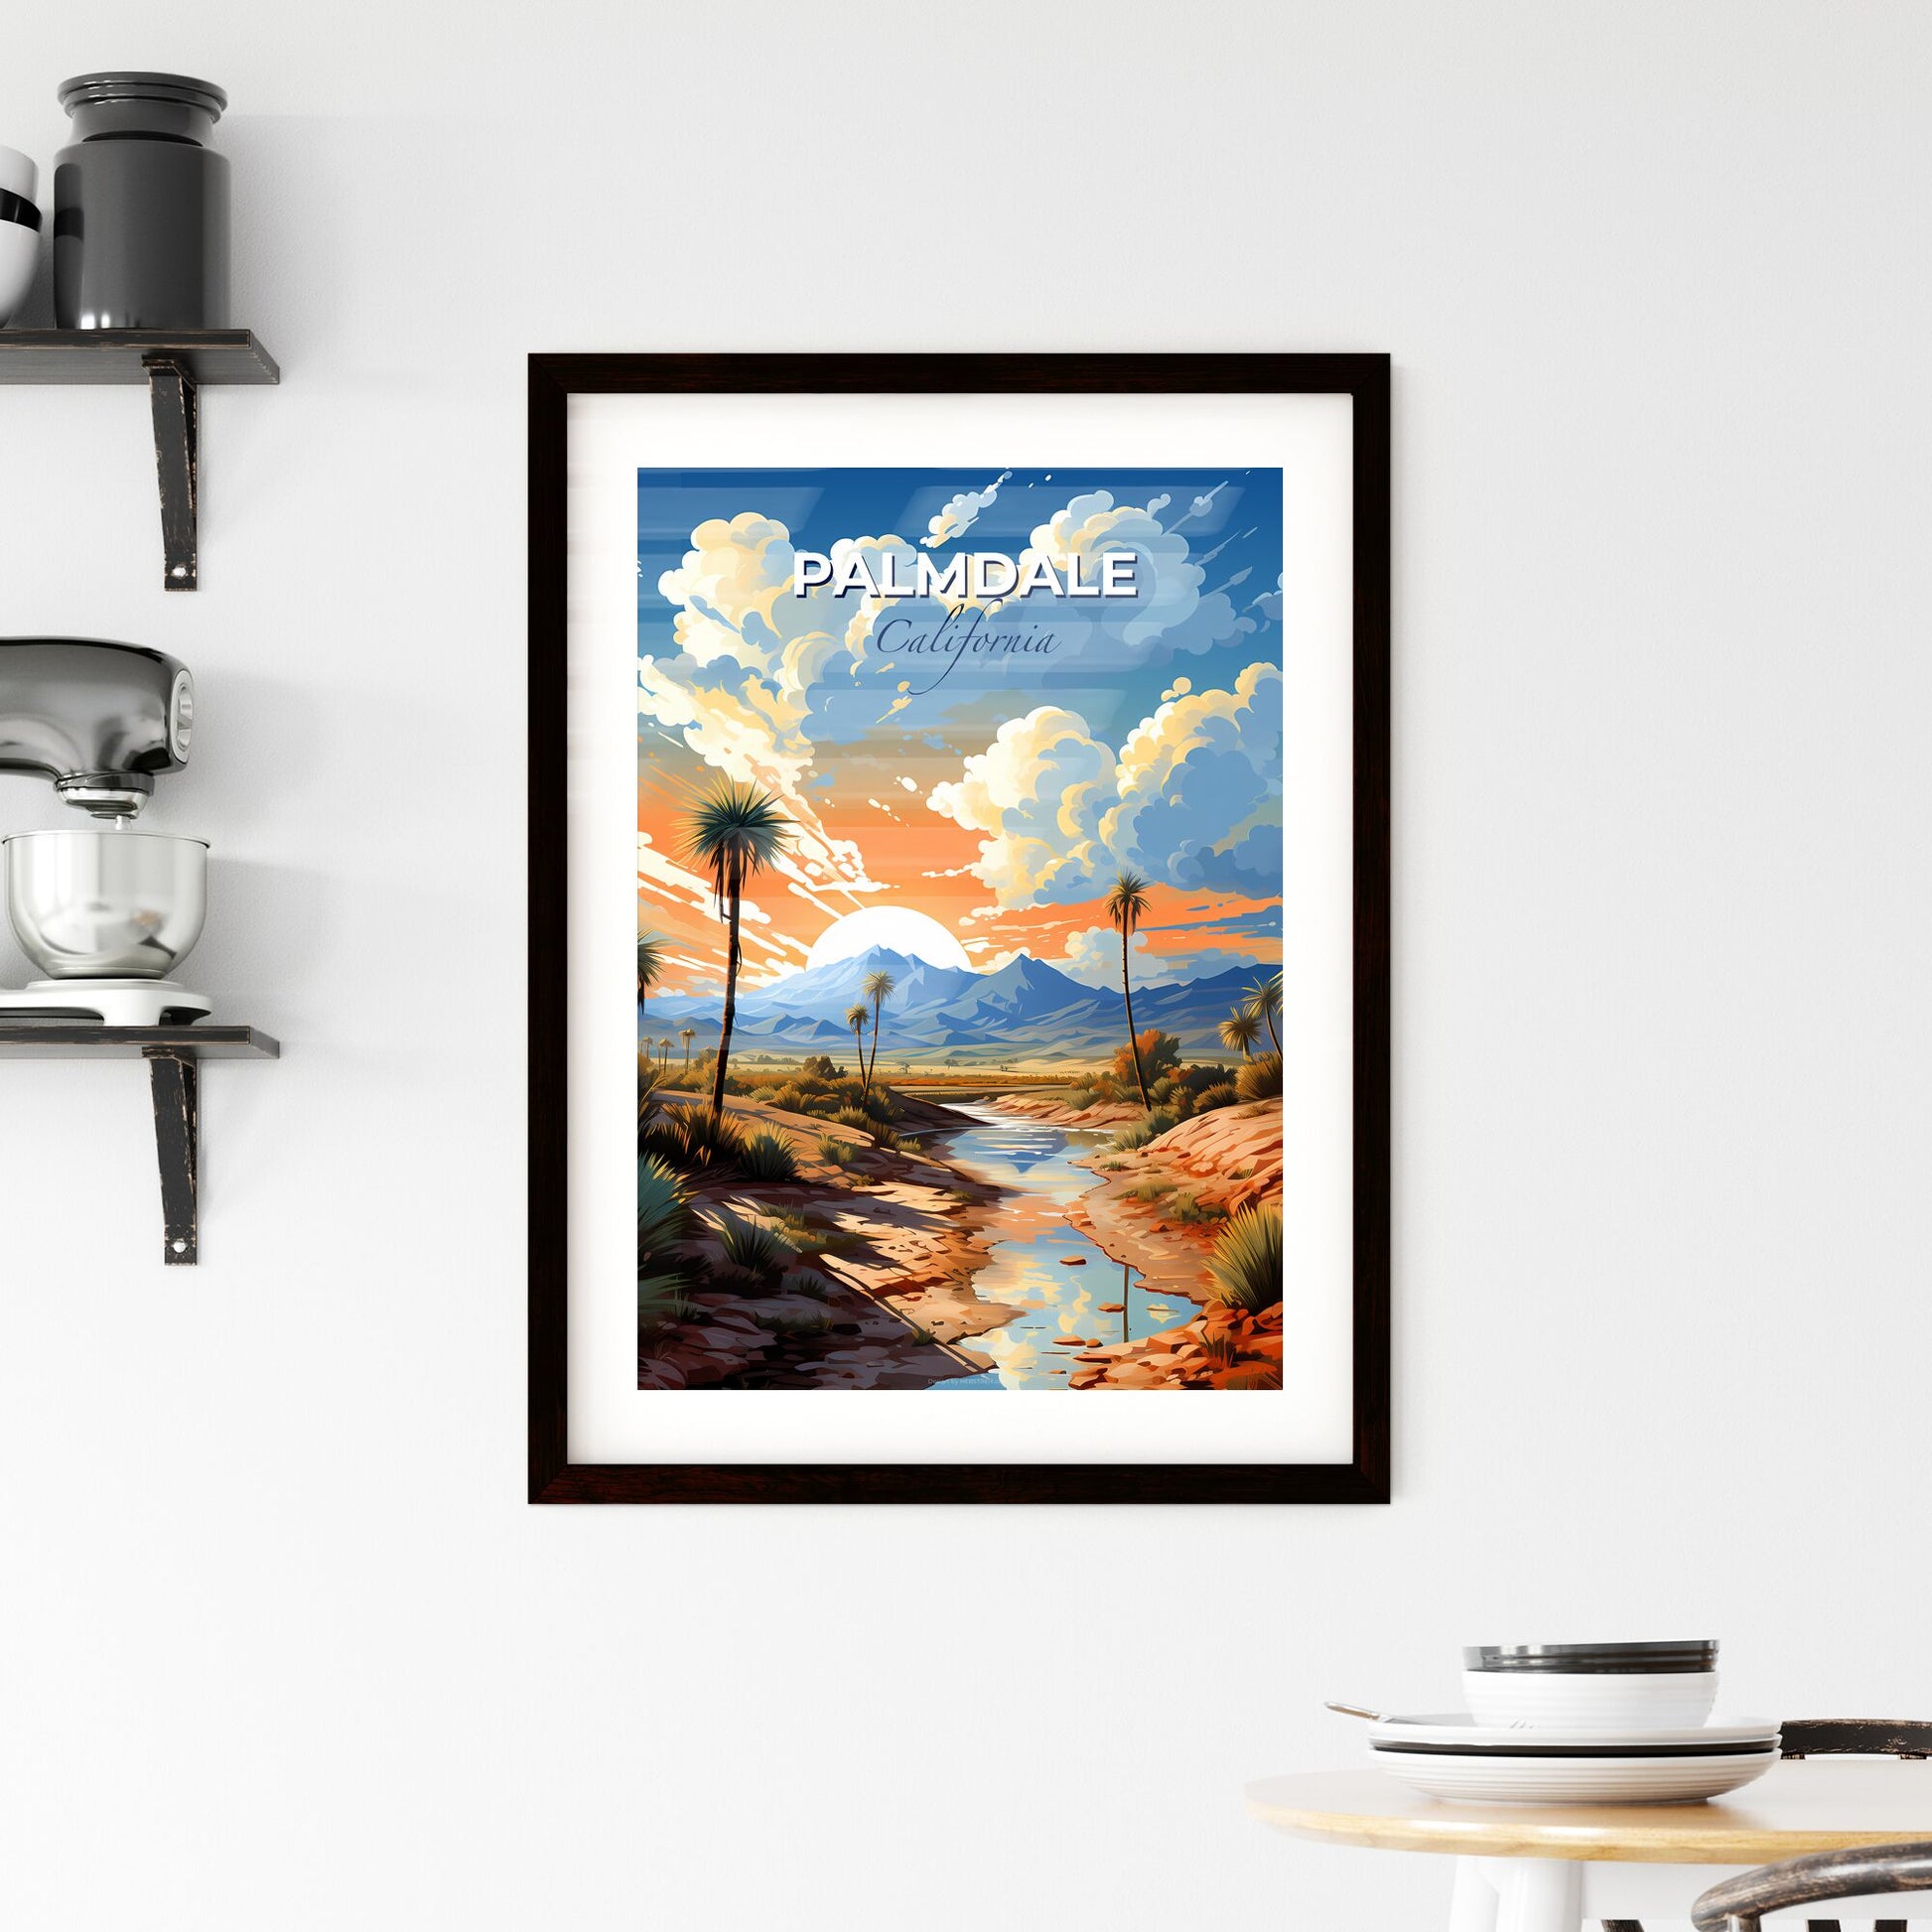 Palmdale, California, A Poster of a river running through a desert with palm trees and mountains in the background Default Title